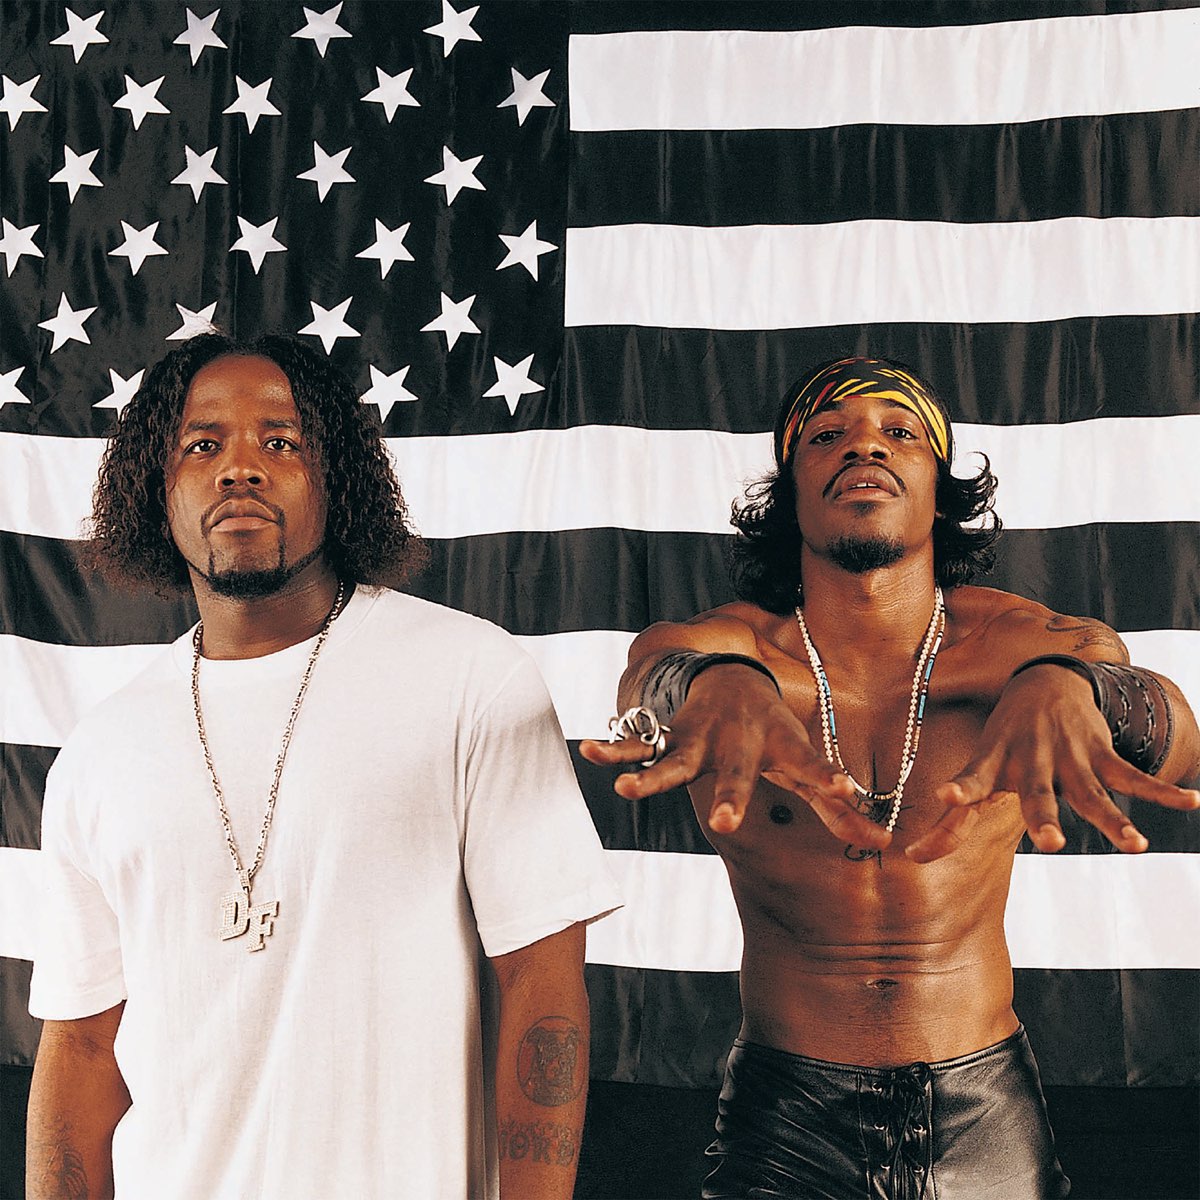 "Stankonia" by Outkast album cover